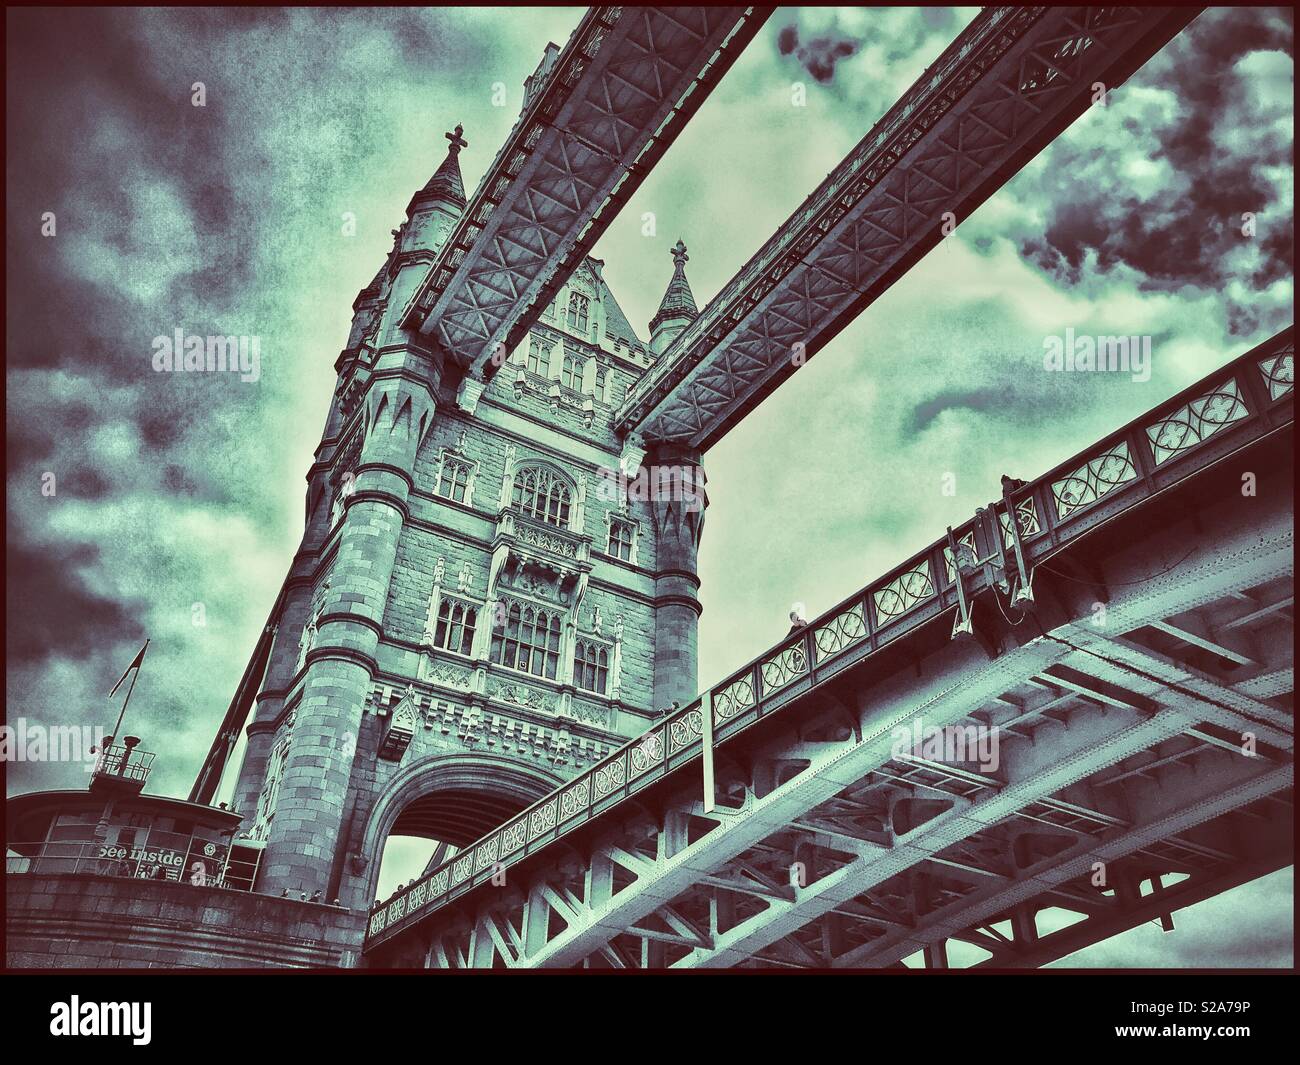 An unusual view of Tower Bridge in London, England. This iconic Victorian structure is a must see for any visitor to London. A view looking up from the River Thames. Photo Credit -© COLIN HOSKINS. Stock Photo